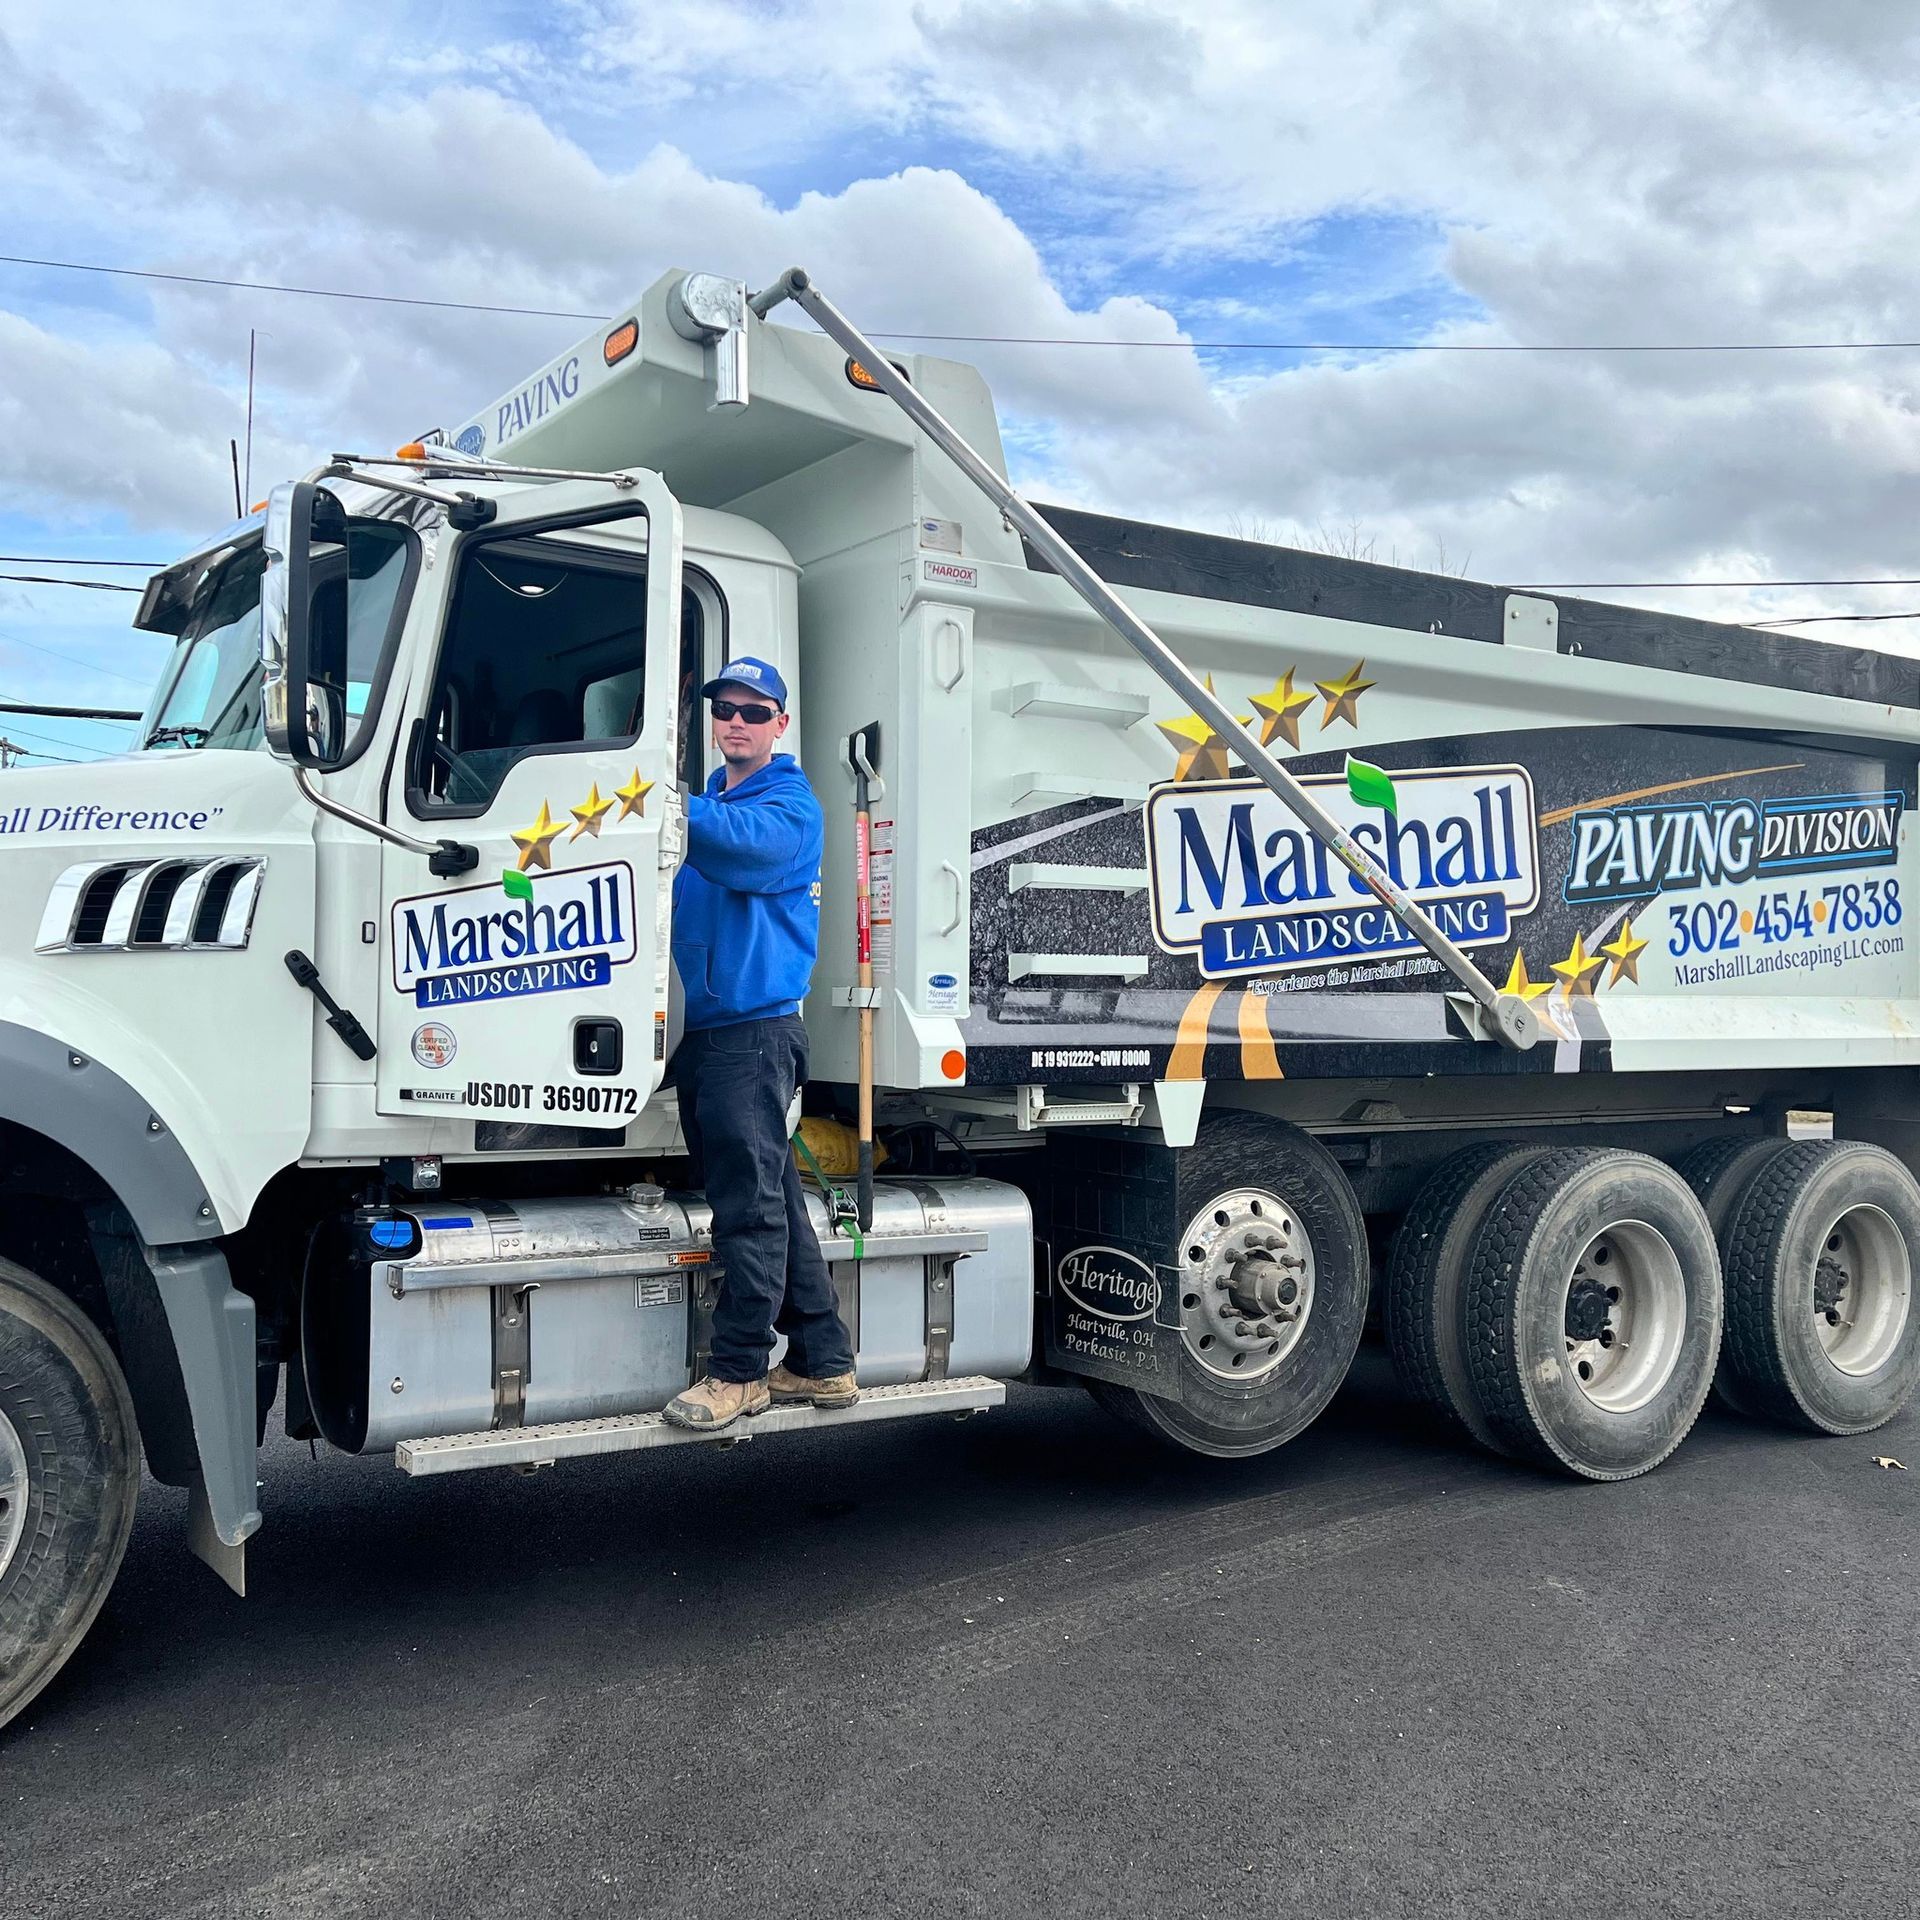 Shawn Marshall, owner of Marshall Landscaping, LLC, pictured stepping onto a branded dump truck wearing a hat and sunglasses